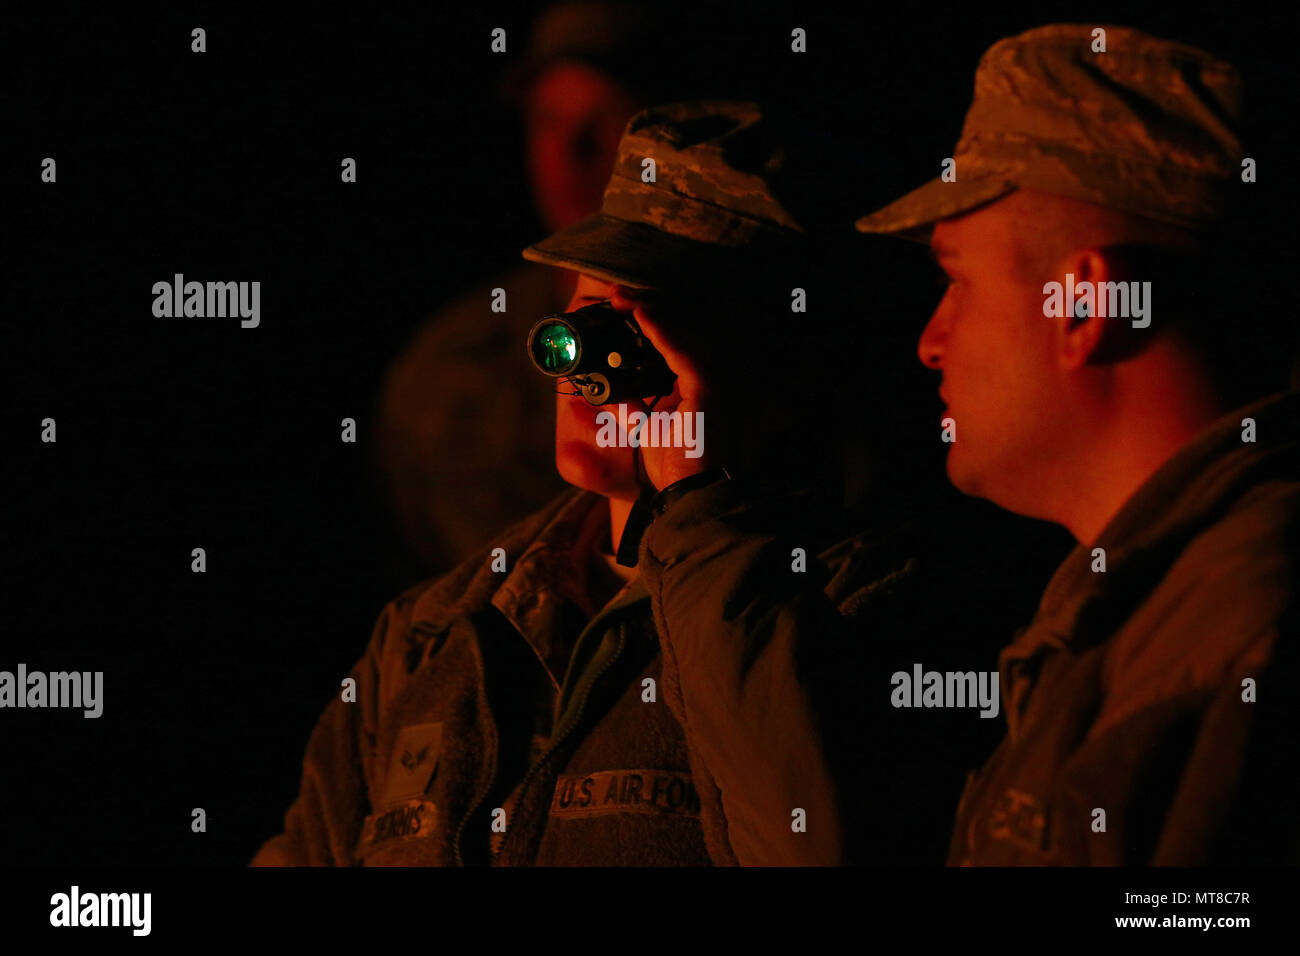 WRIGHT-PATTERSON AIR FORCE BASE, Ohio – Senior Airman Paula Dennis (left) and Senior Airman Tyler Acevedo, 445th Security Forces Squadron, test out night vision goggles during training at the Oakes Quarry, Fairborn on May 6, 2017.   The three-day expeditionary training consisted of several phases to include: Humvee mount/dismount, SERE, setting up/tear down tents, and night vision goggles.  (U.S. Air Force photo /Master Sgt. Patrick O’Reilly) Stock Photo